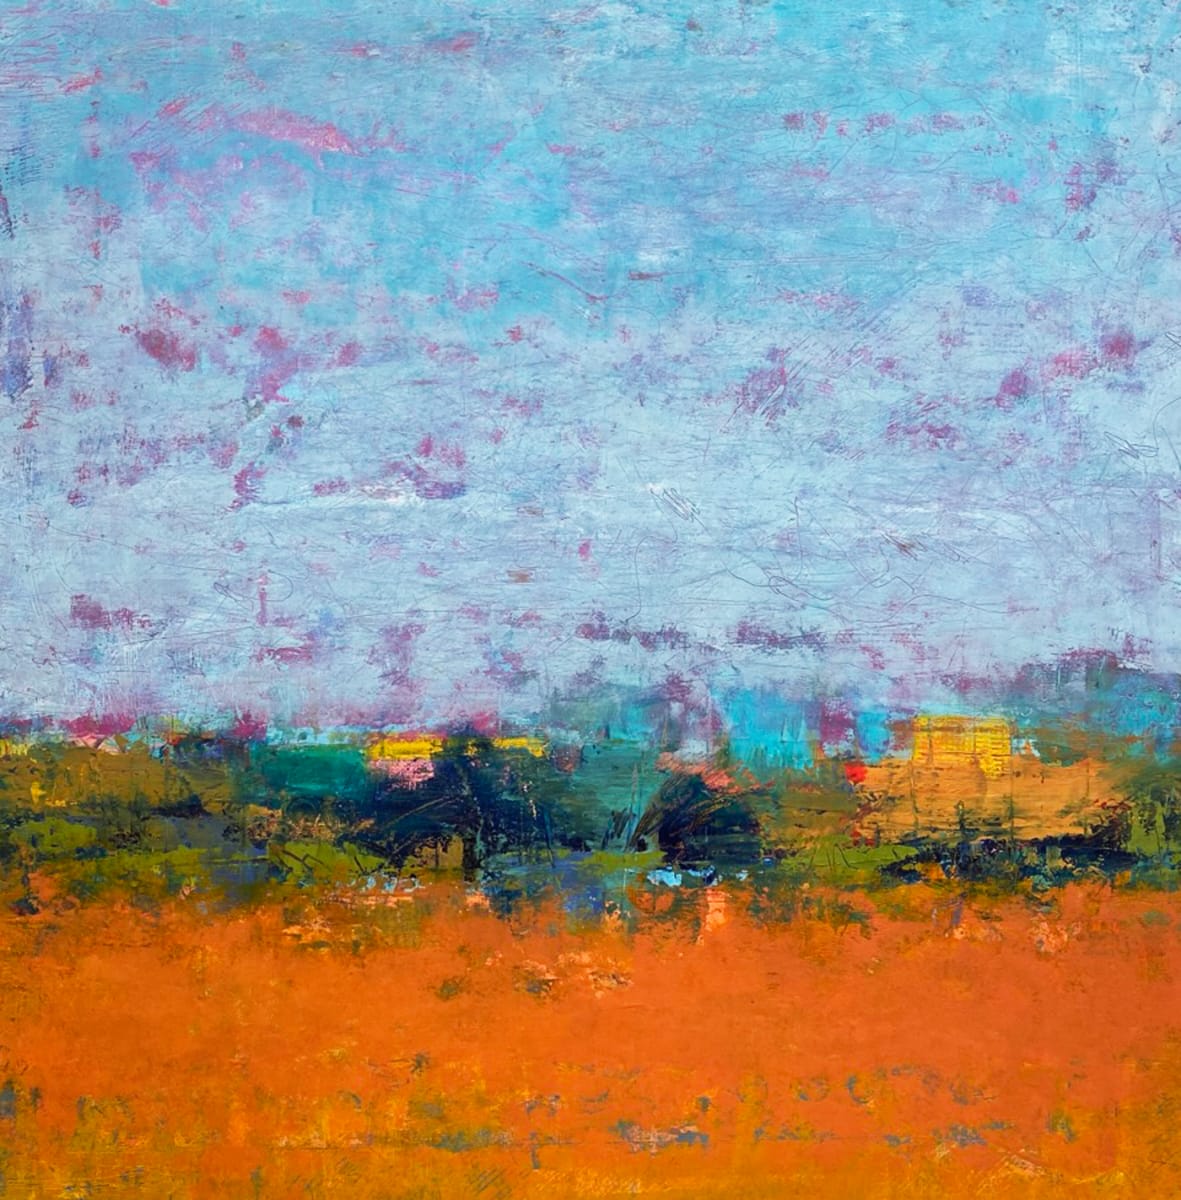 Sunlit Moments, 30x30" by Ginnie Cappaert 